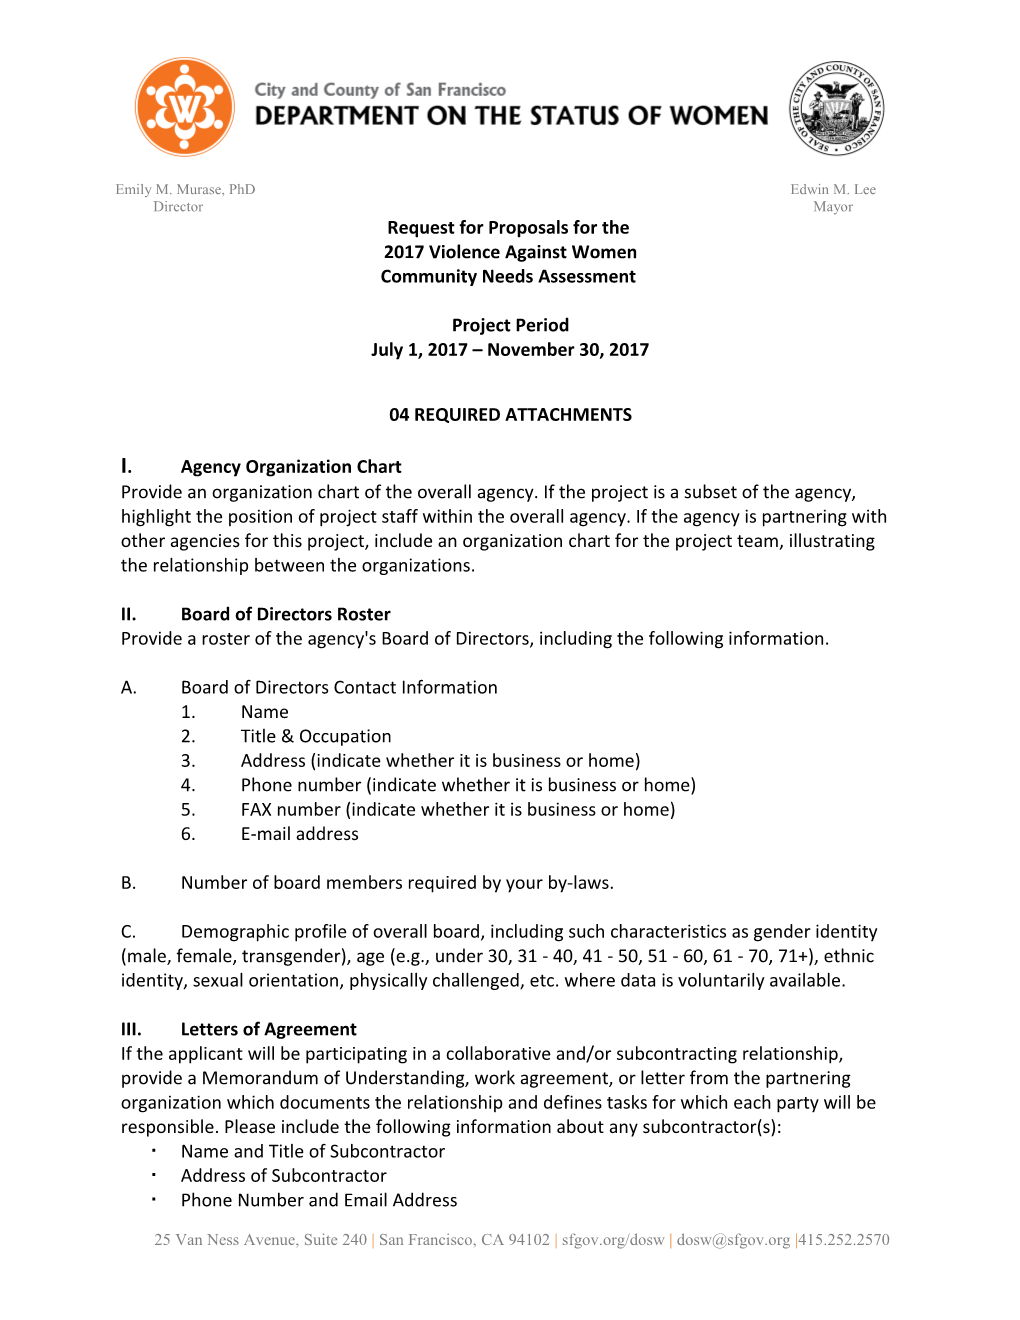 Request for Proposals for the 2017 Violence Against Women Community Needs Assessment